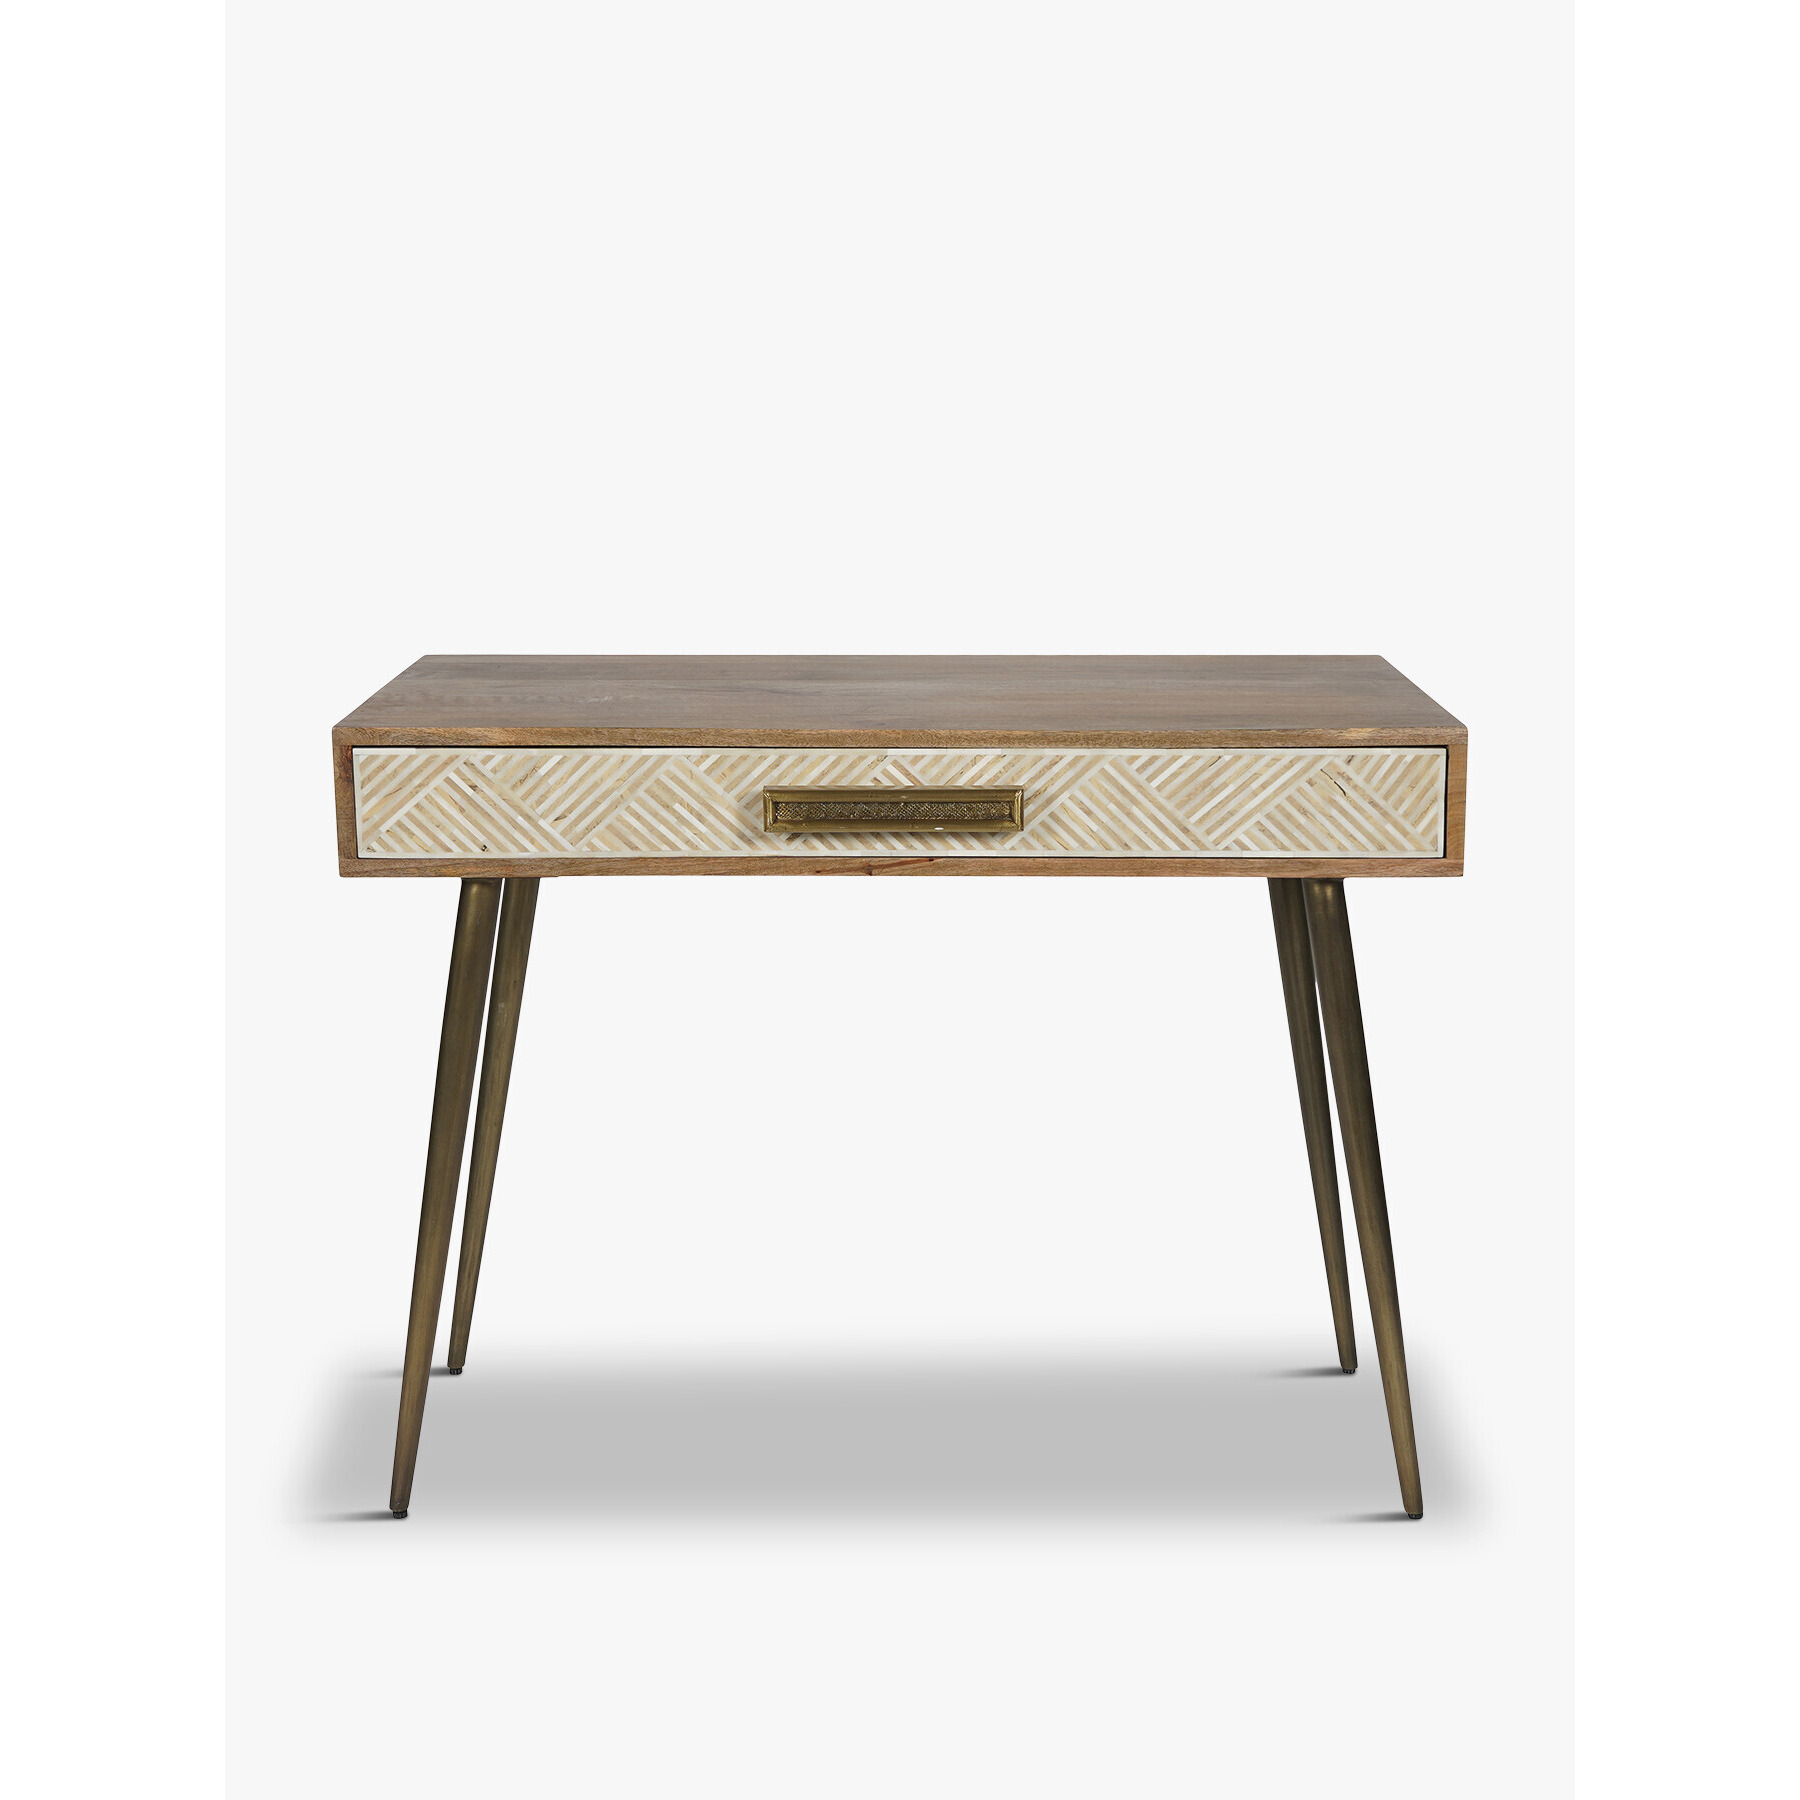 Libra Interiors Linden Bone and Mango wood Desk Table with Drawer - Size 920x75x100cm Brown - image 1